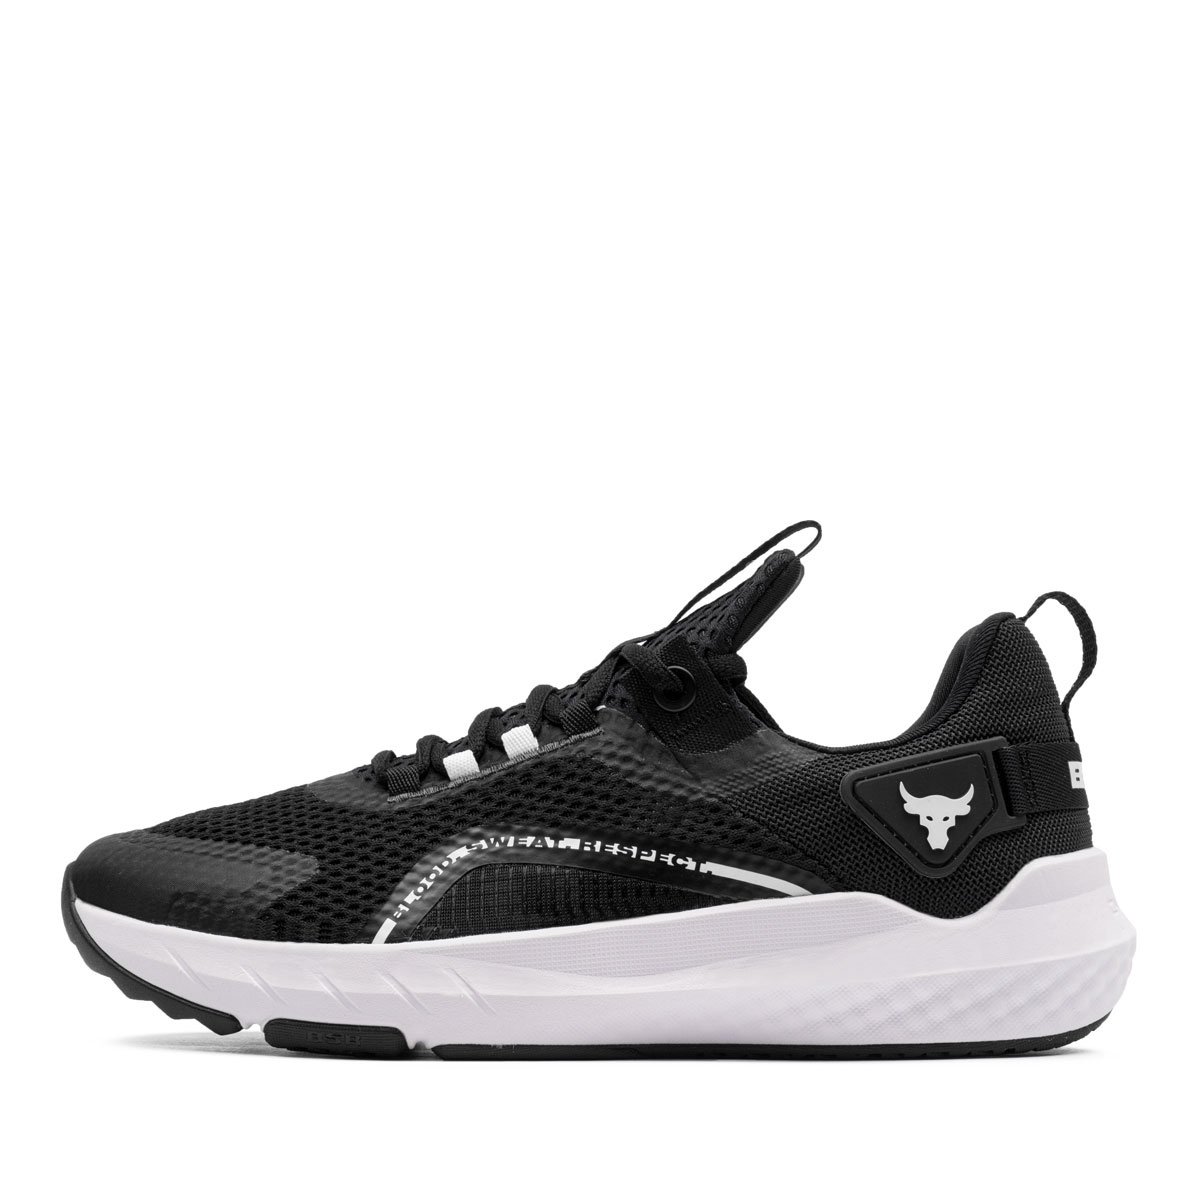 Under Armour Project Rock BSR 3 Мъжки маратонки 3026462-001